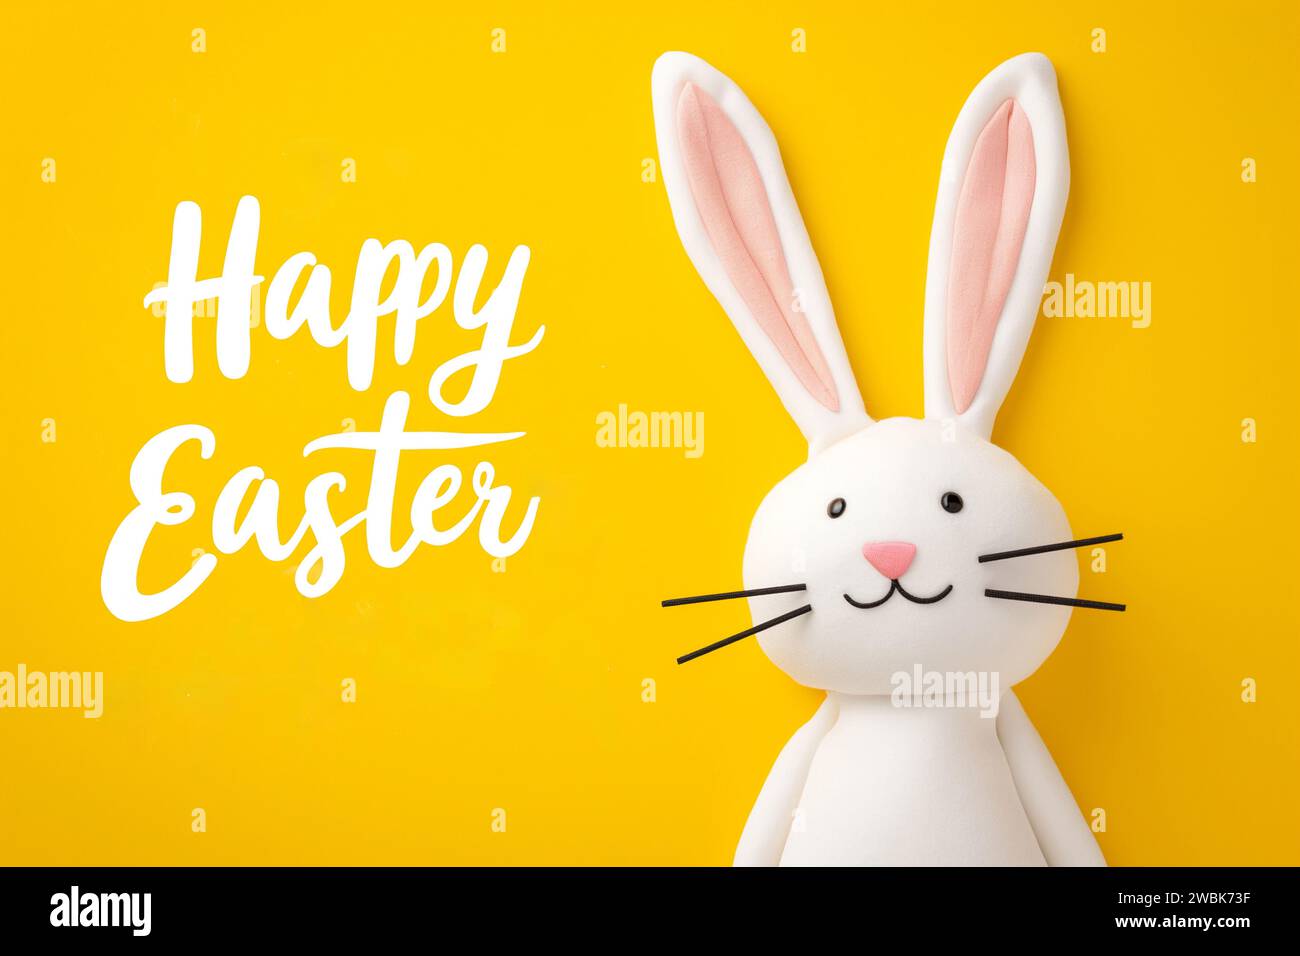 Happy easter, Happy Easter Greeting with Cartoon Bunny on Bright Yellow Background and Playful White Cursive Font Stock Photo